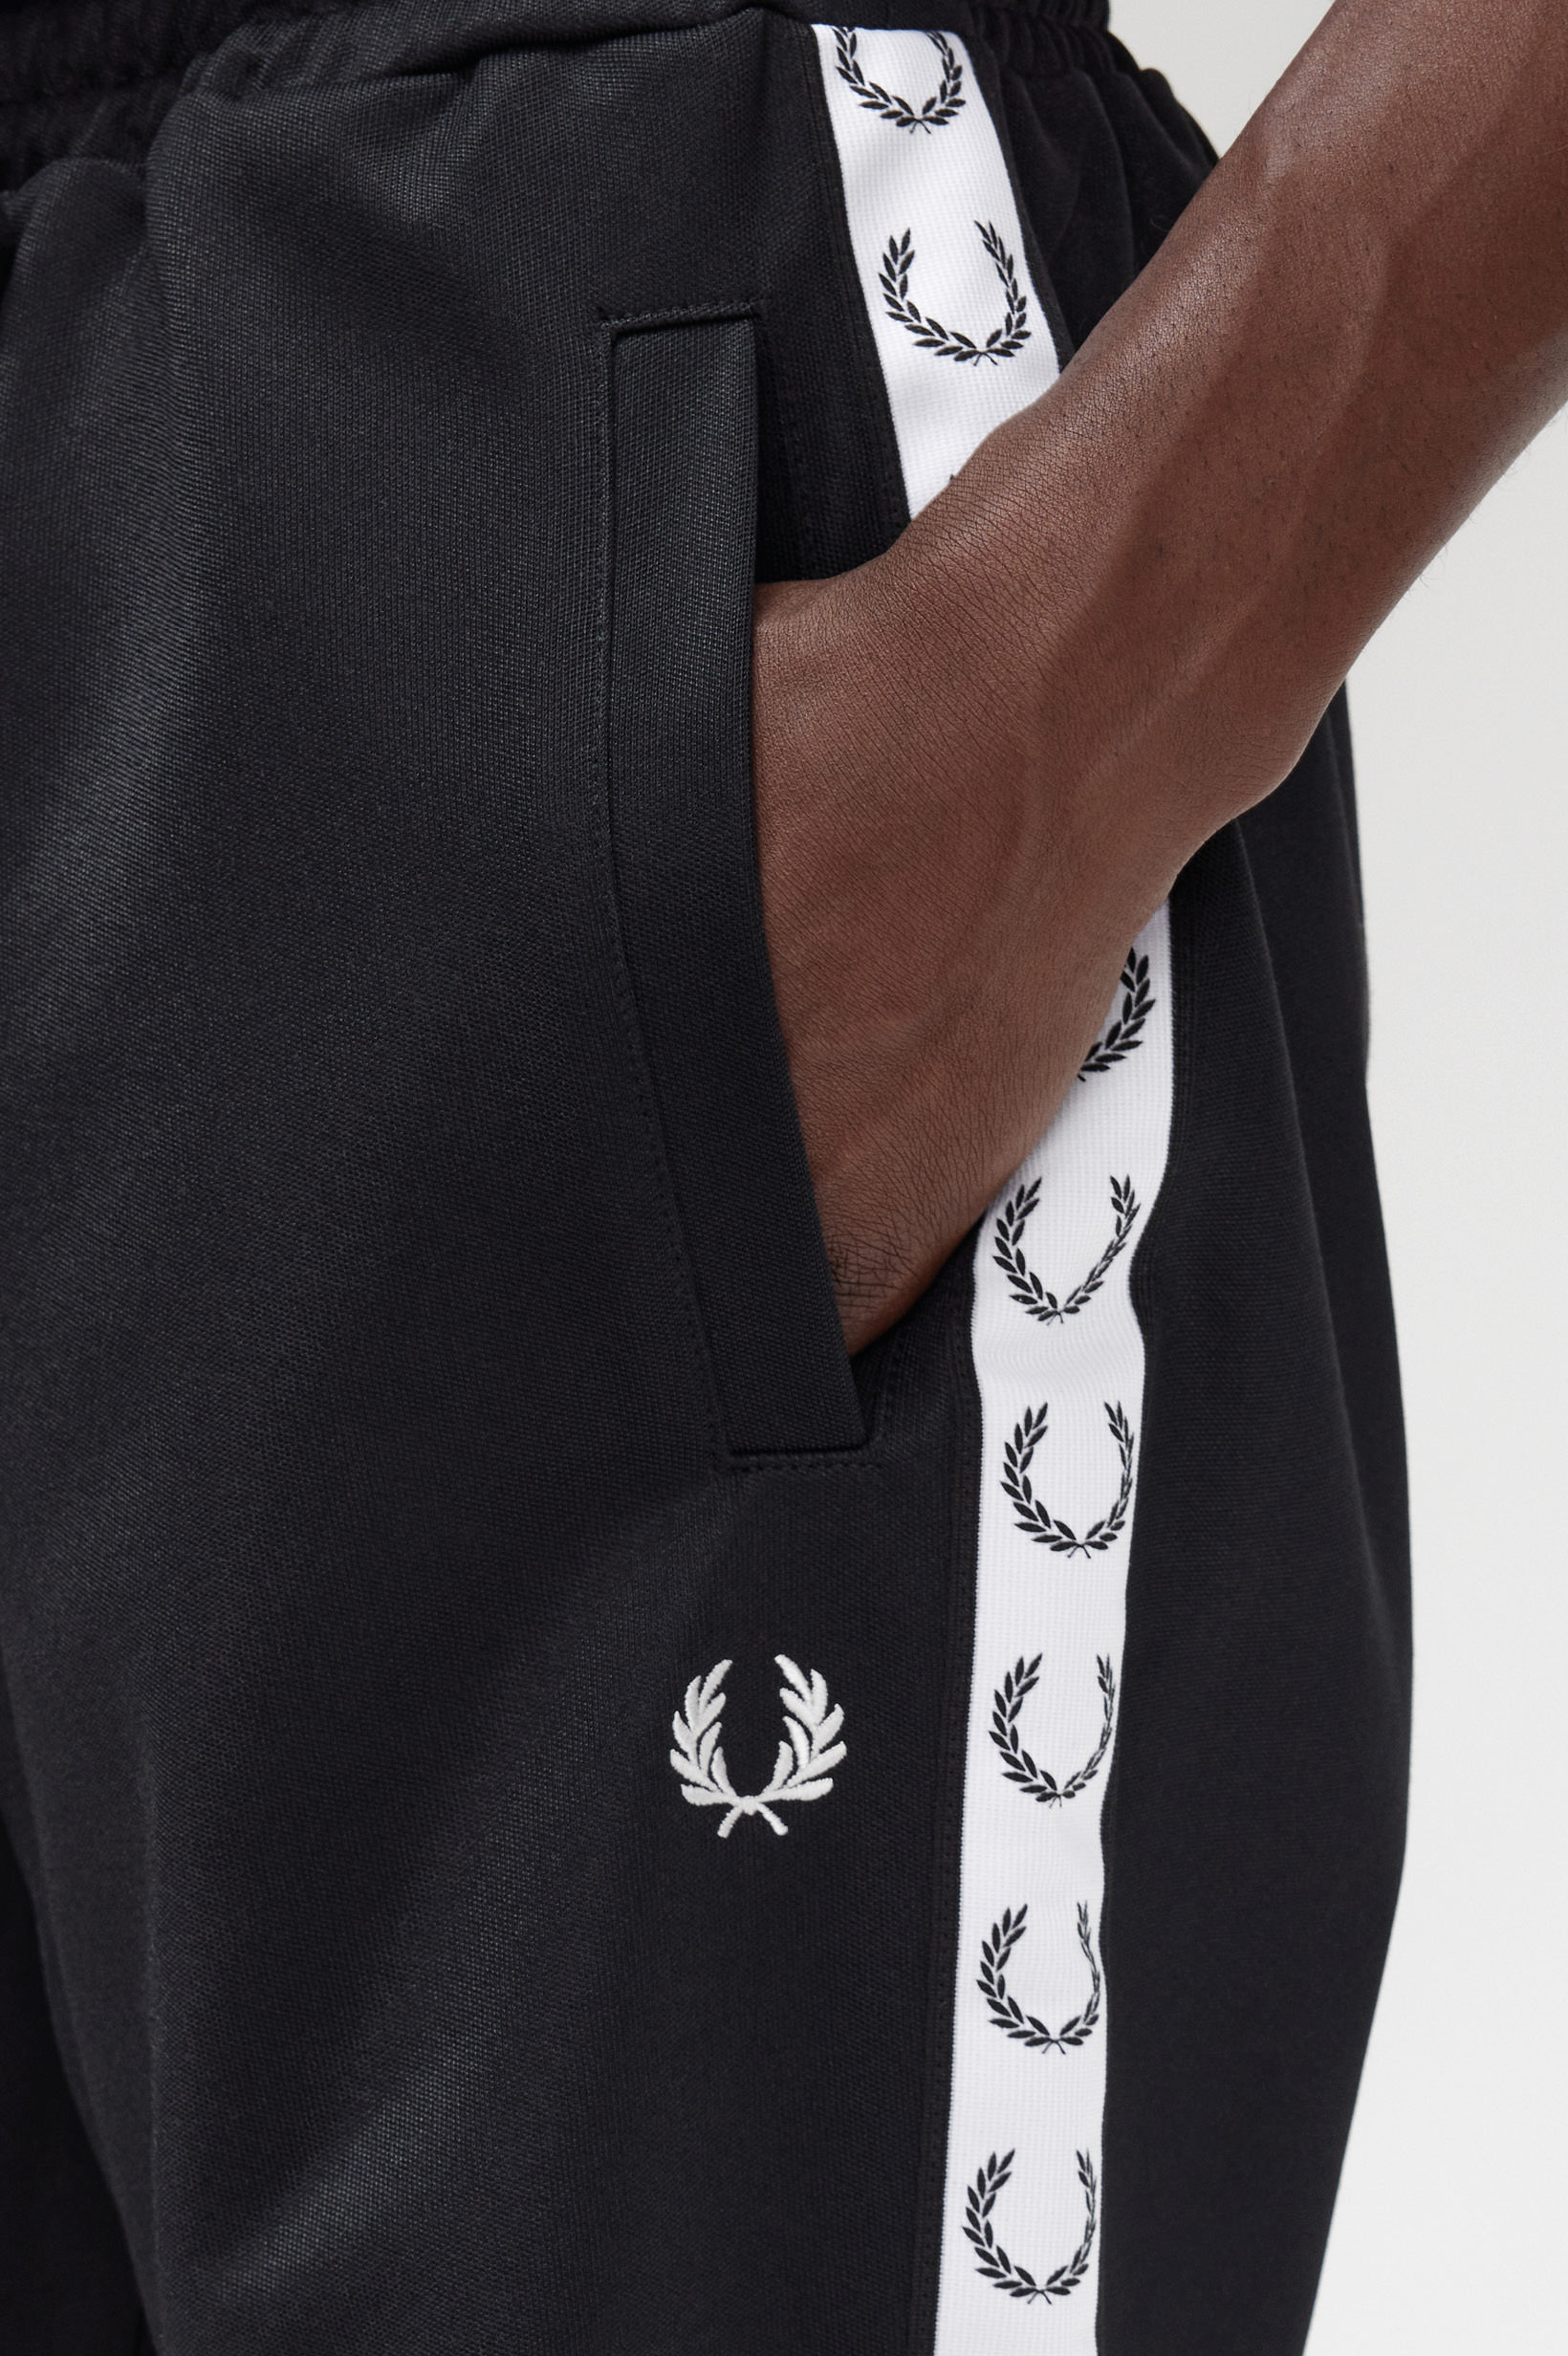 FRED PERRY】Taped Tricot Short ブラック Sサイズ | ochge.org